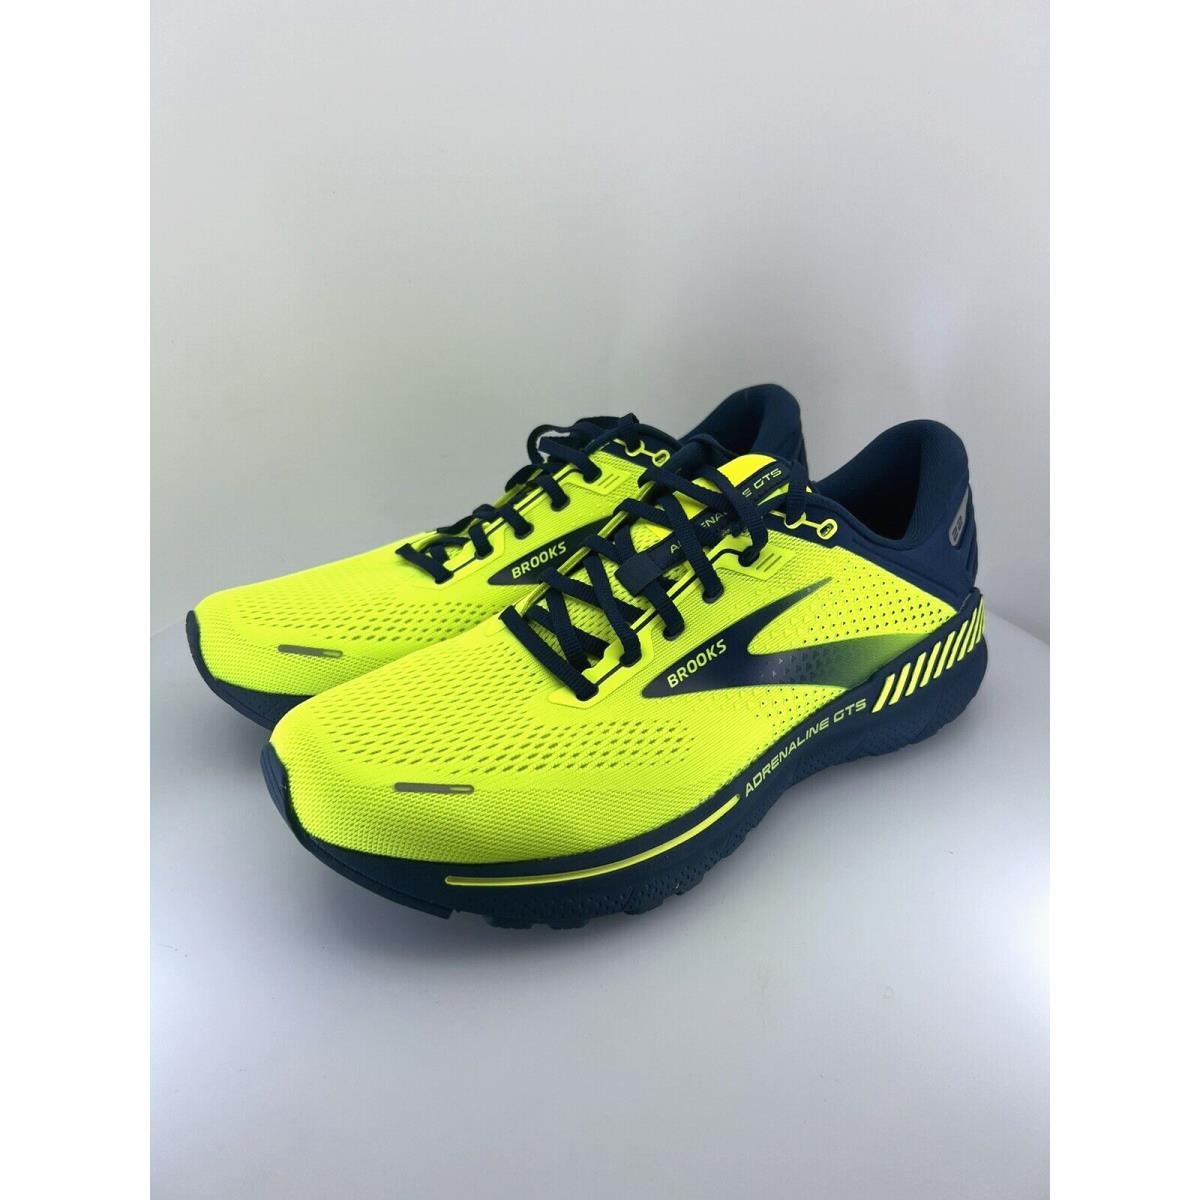 Brooks Adrenaline Gts 22 Mens Size 11.5 Blue/yellow Cushion Support